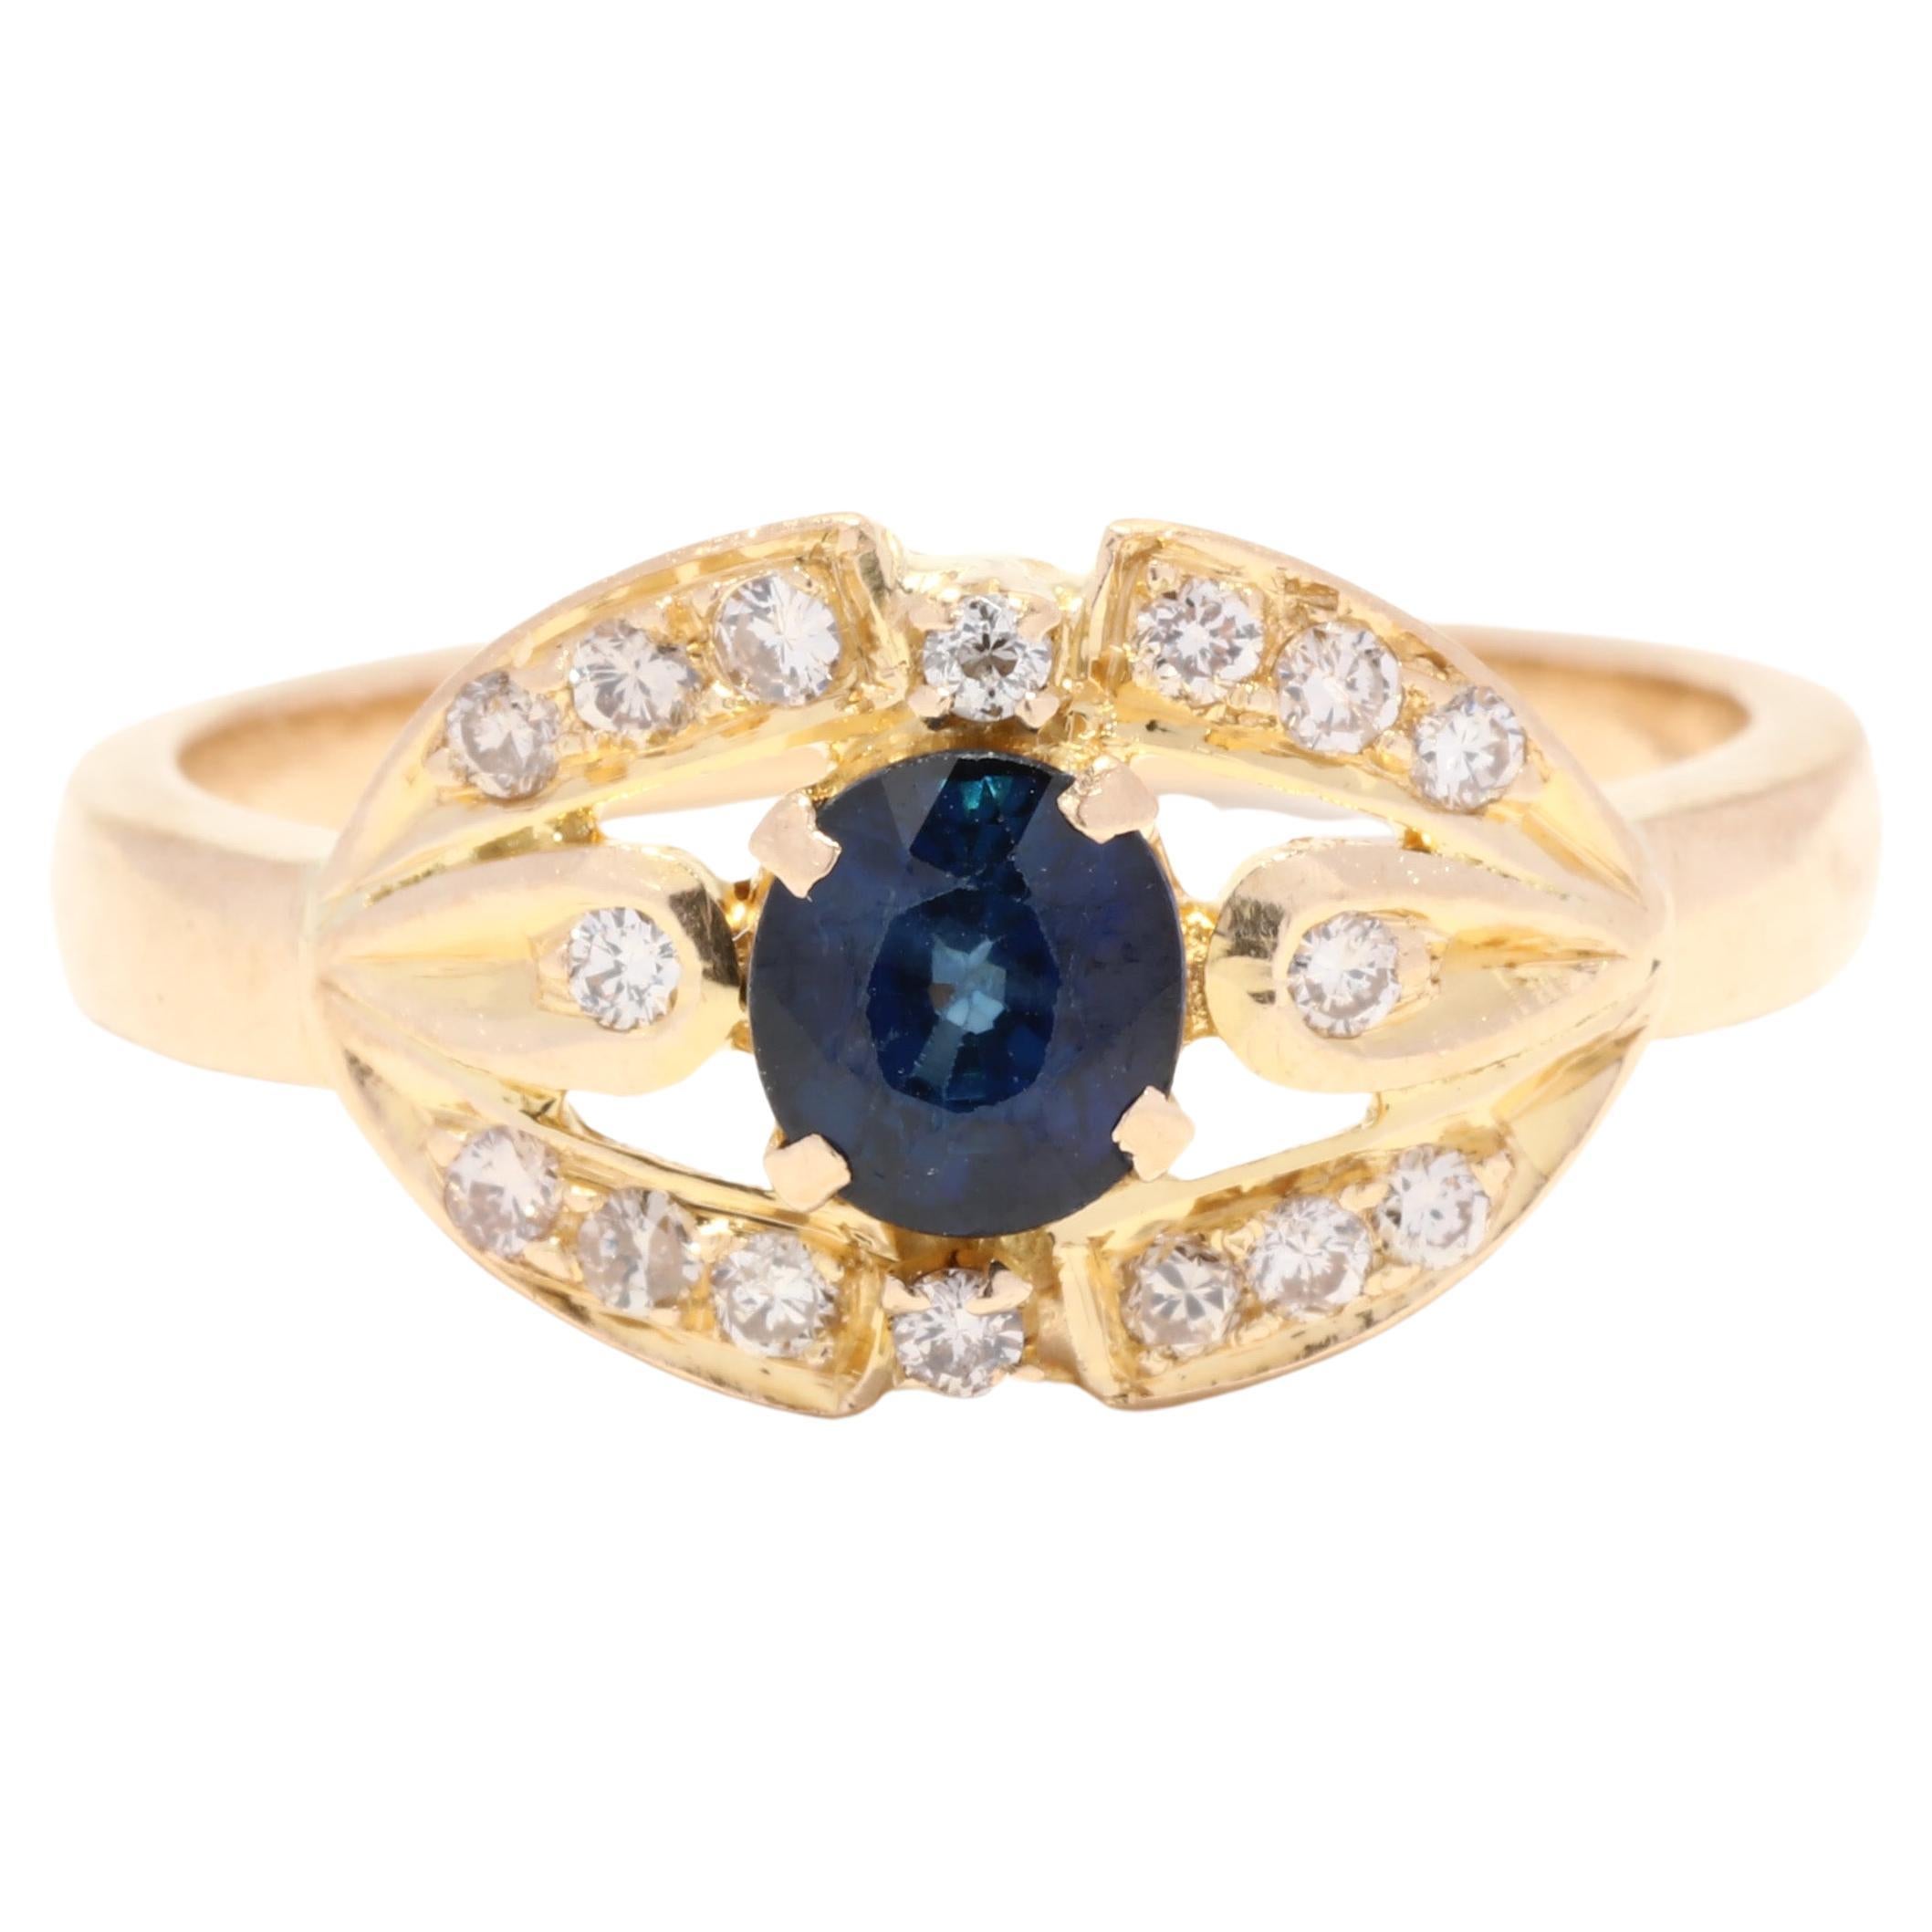 Sapphire Diamond Cocktail Ring, 18KT Yellow Gold, Ring